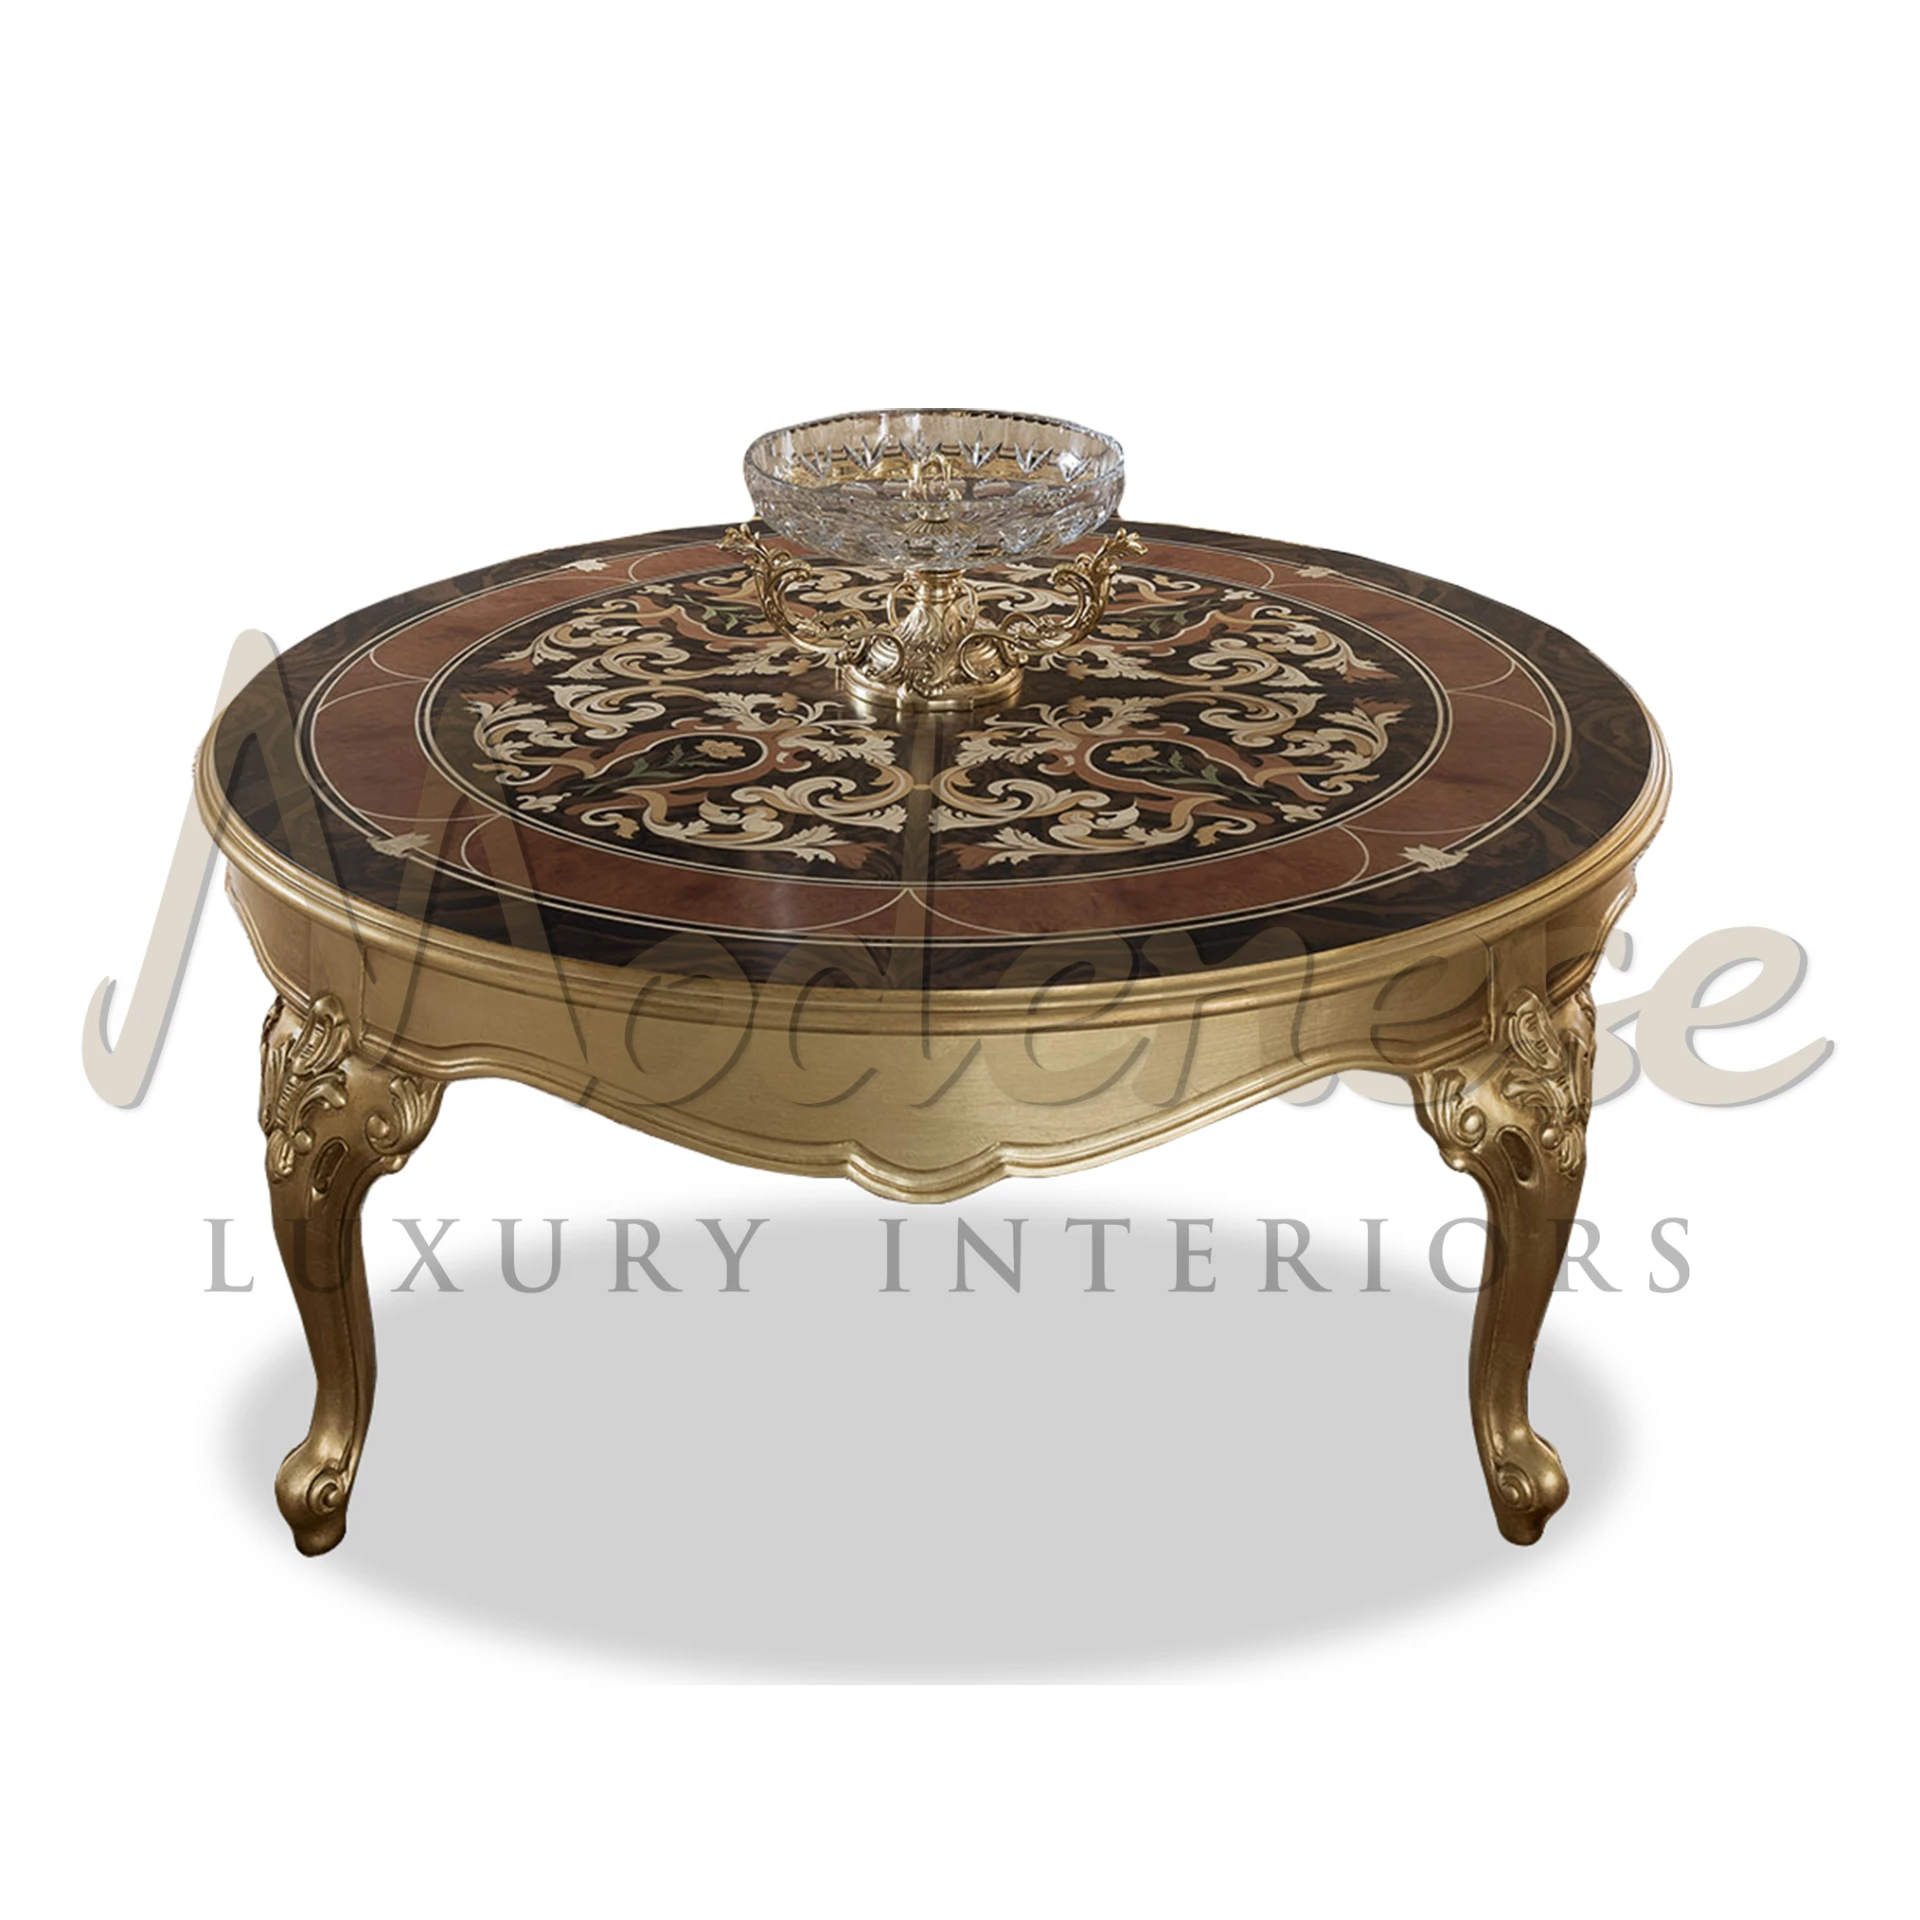 Traditional Wood Inlaid Round Coffee Table, timeless elegance.